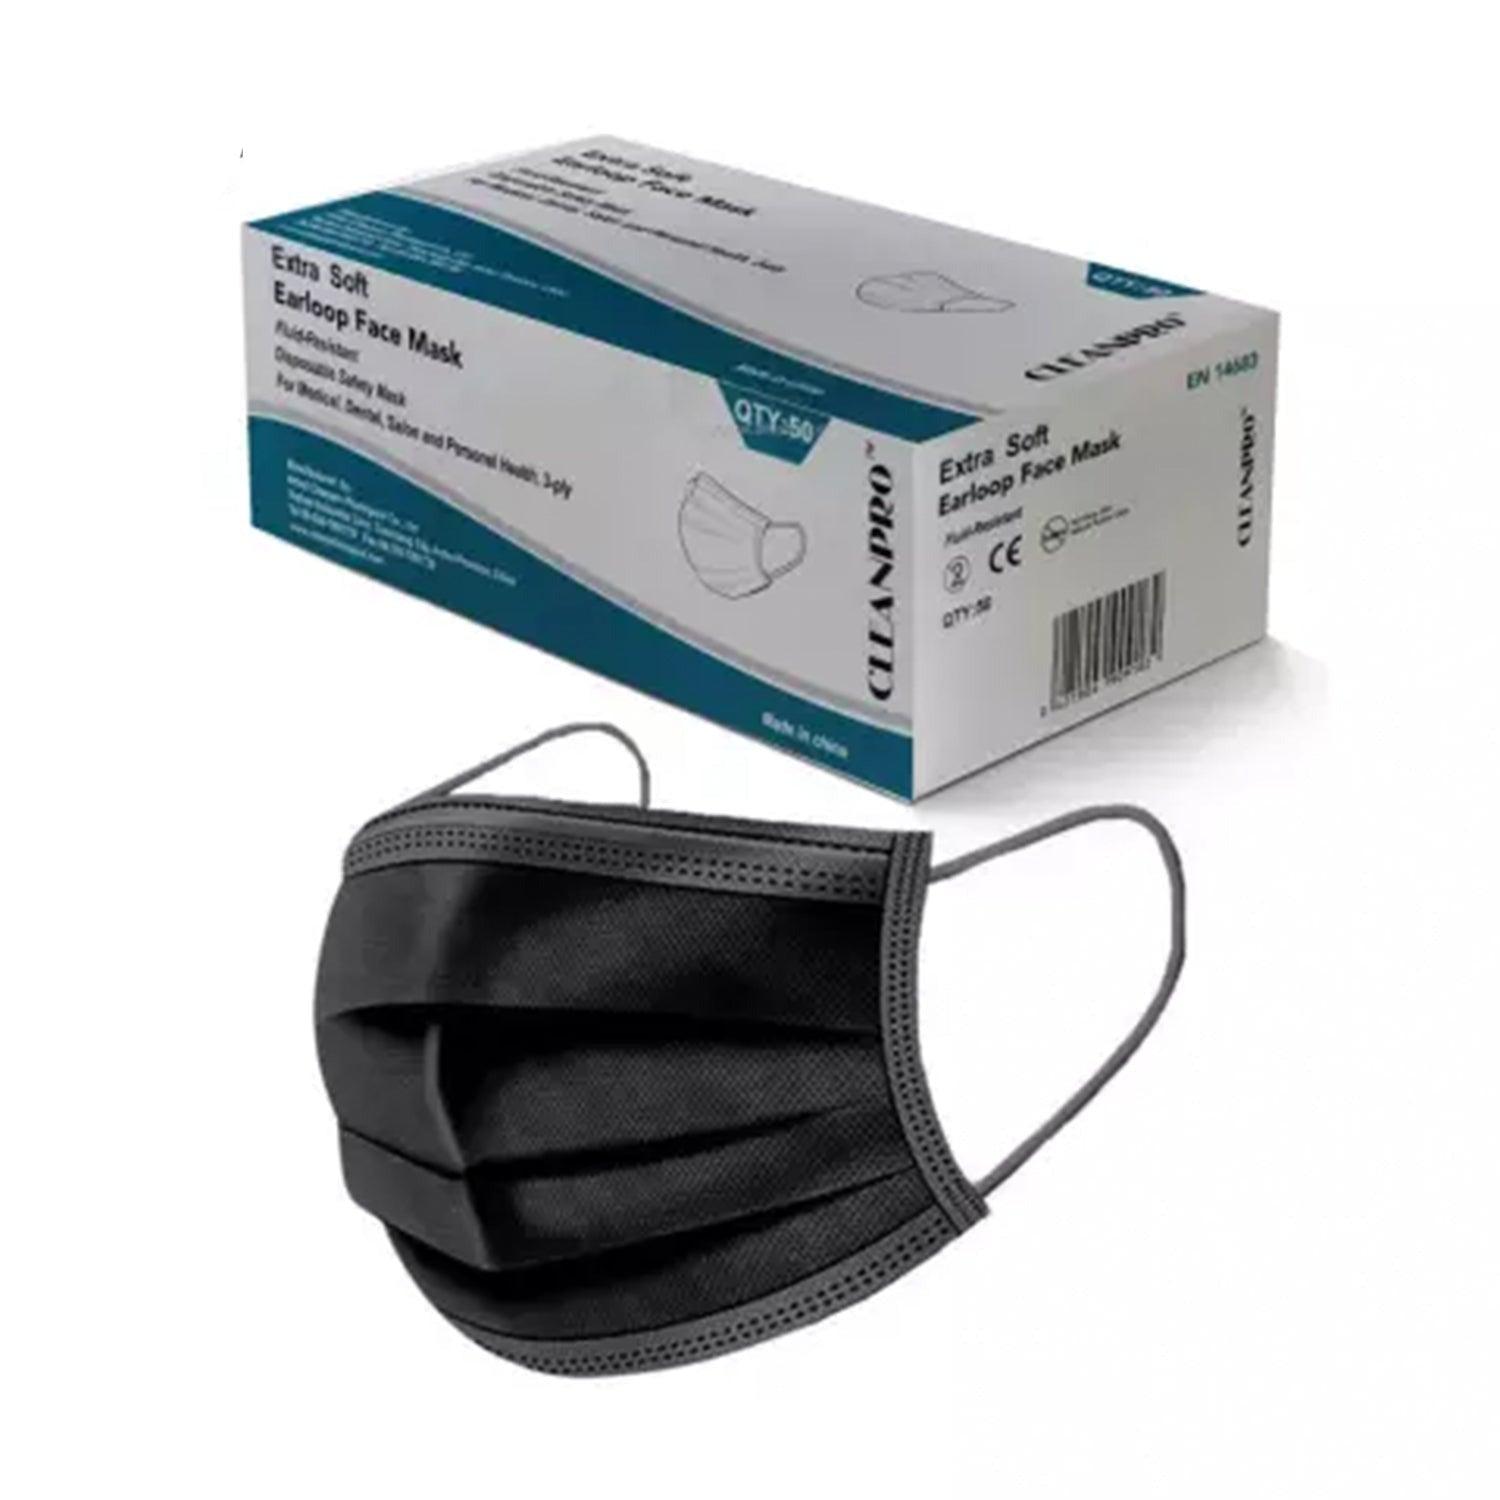 Disposable Medical Face Mask 3-Ply. 50 pieces- 3 Colour Options - Anjelstore 